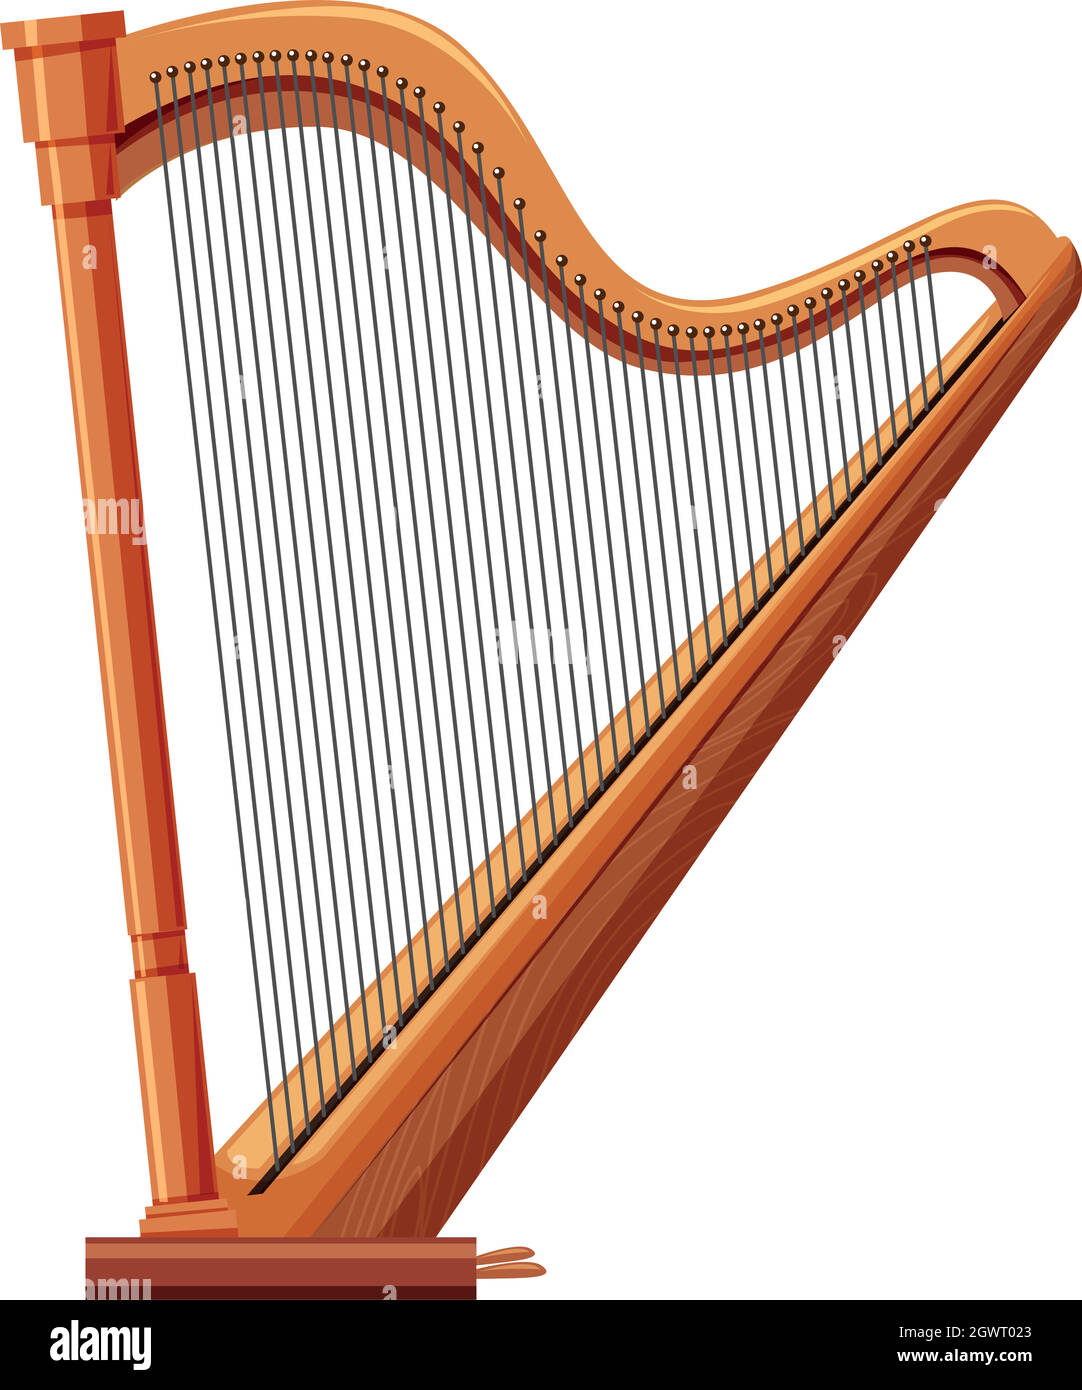 Harp made of wood Stock Vector